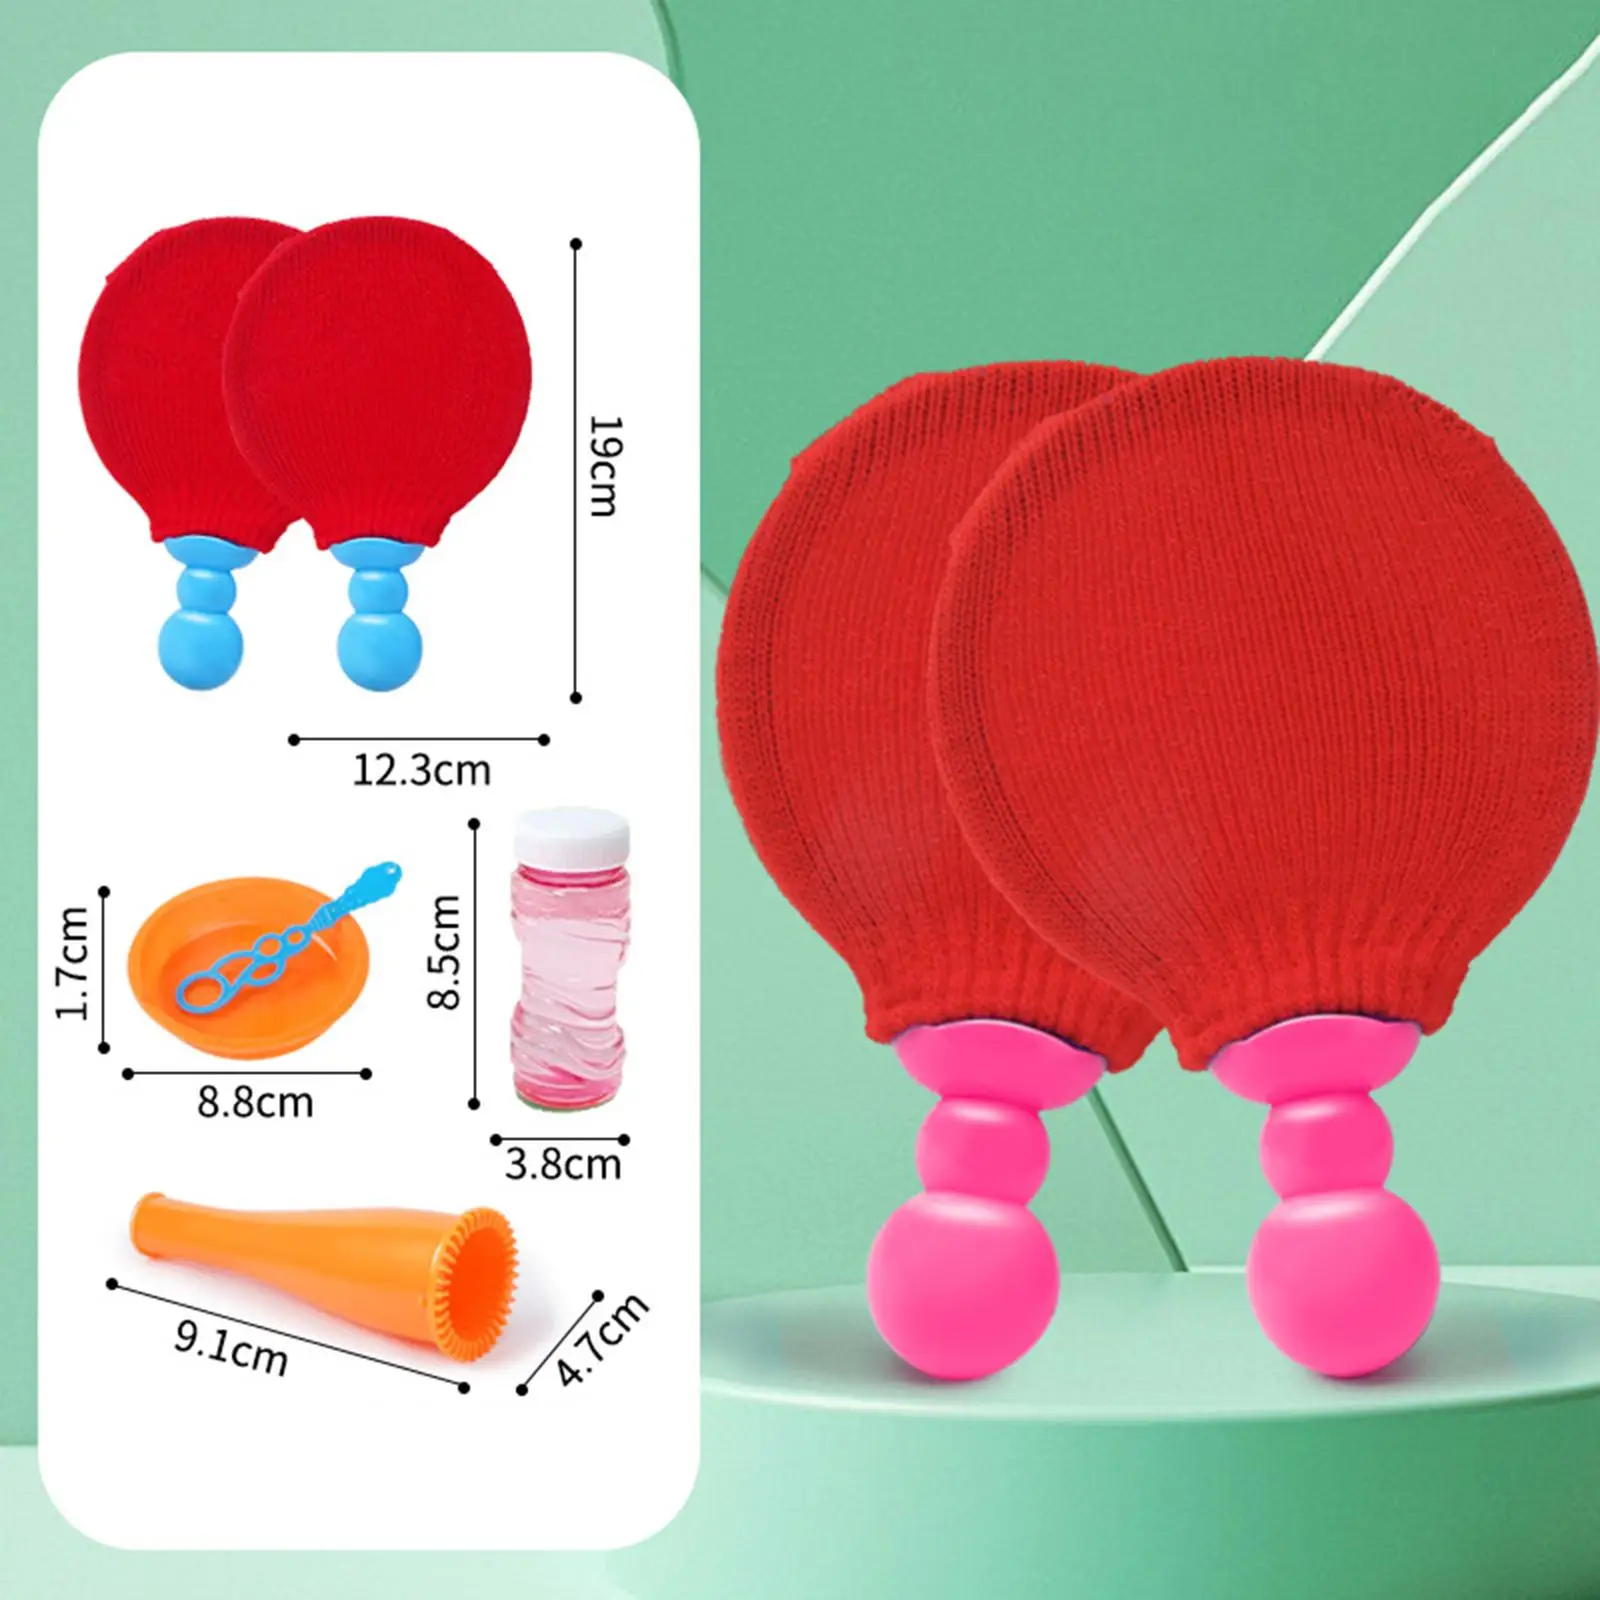 Bubble Toss and Catch Game Table Tennis Sports and Fun Exercise Toy for Beach Toys Lawn Backyard Party Activities Holiday Gift